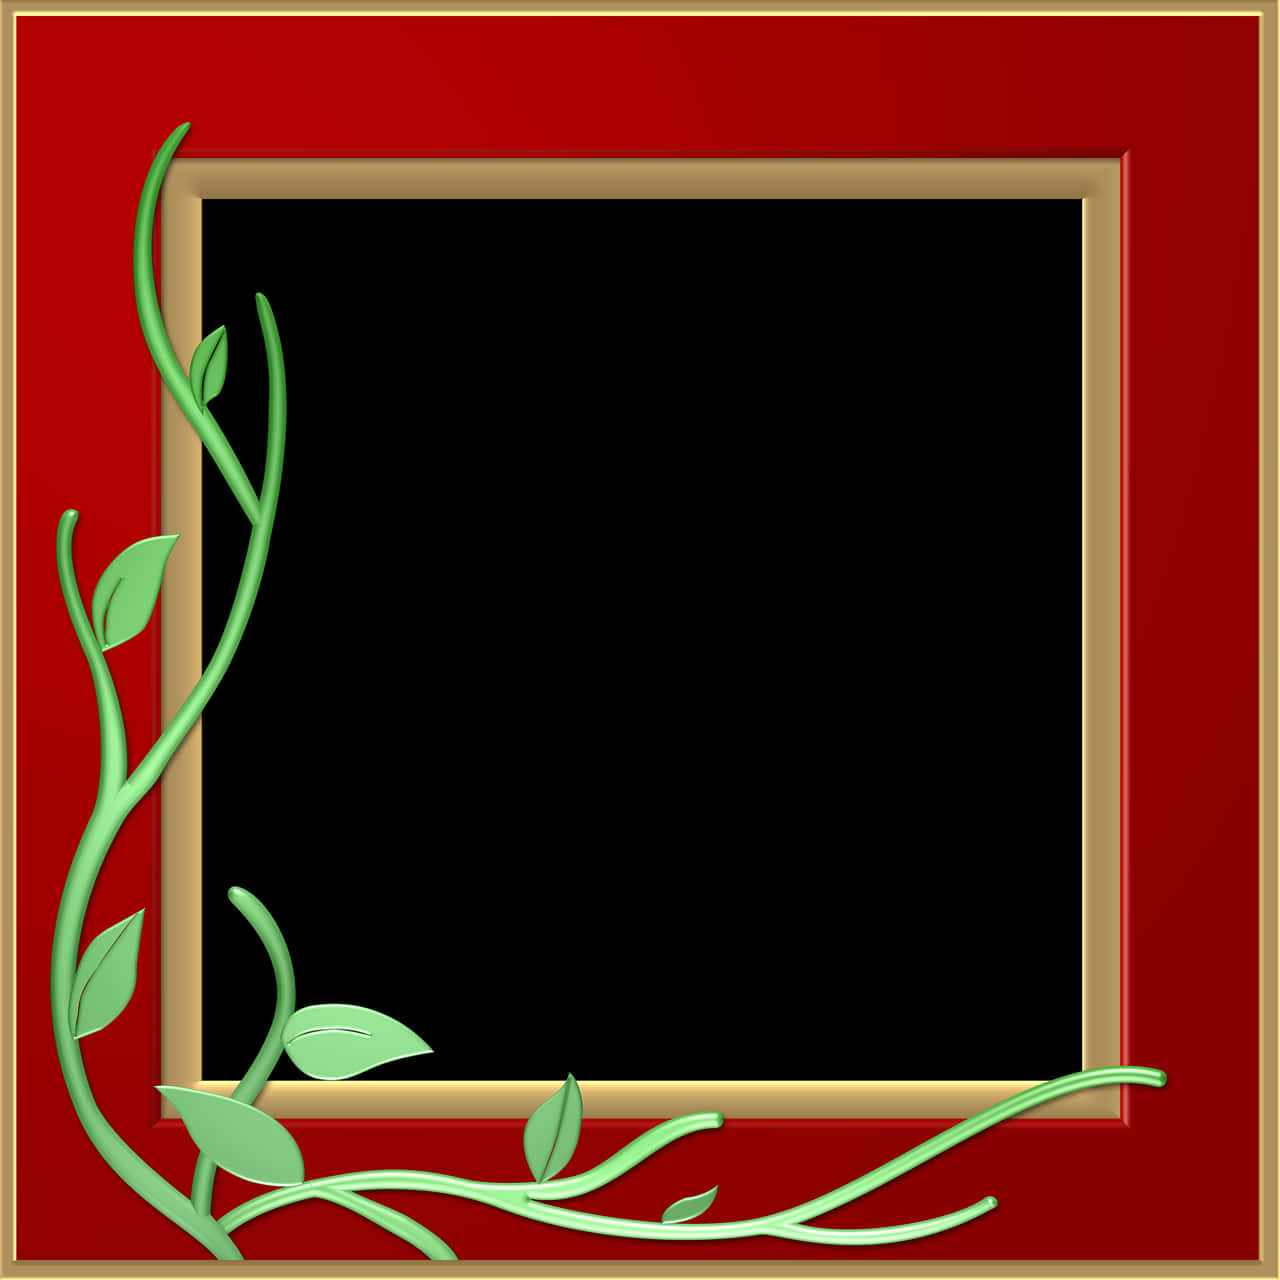 A Red Frame With Green Leaves